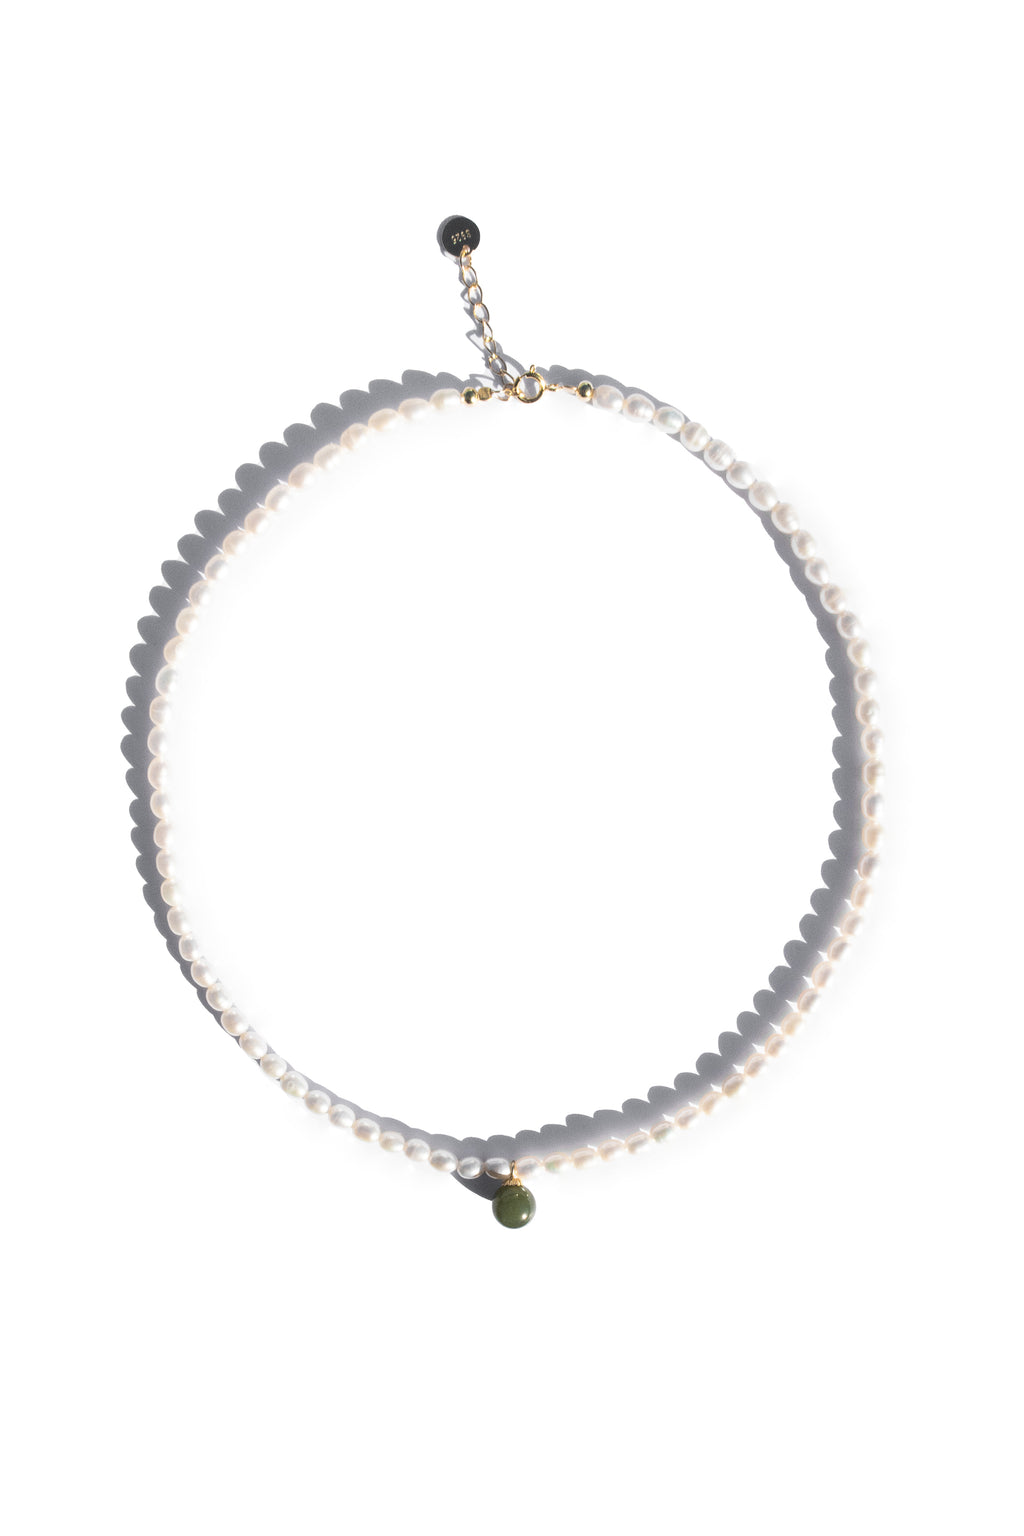 seree-belle-choker-necklace-beaded-with-pearl-and-green-nephrite-jade-pendant